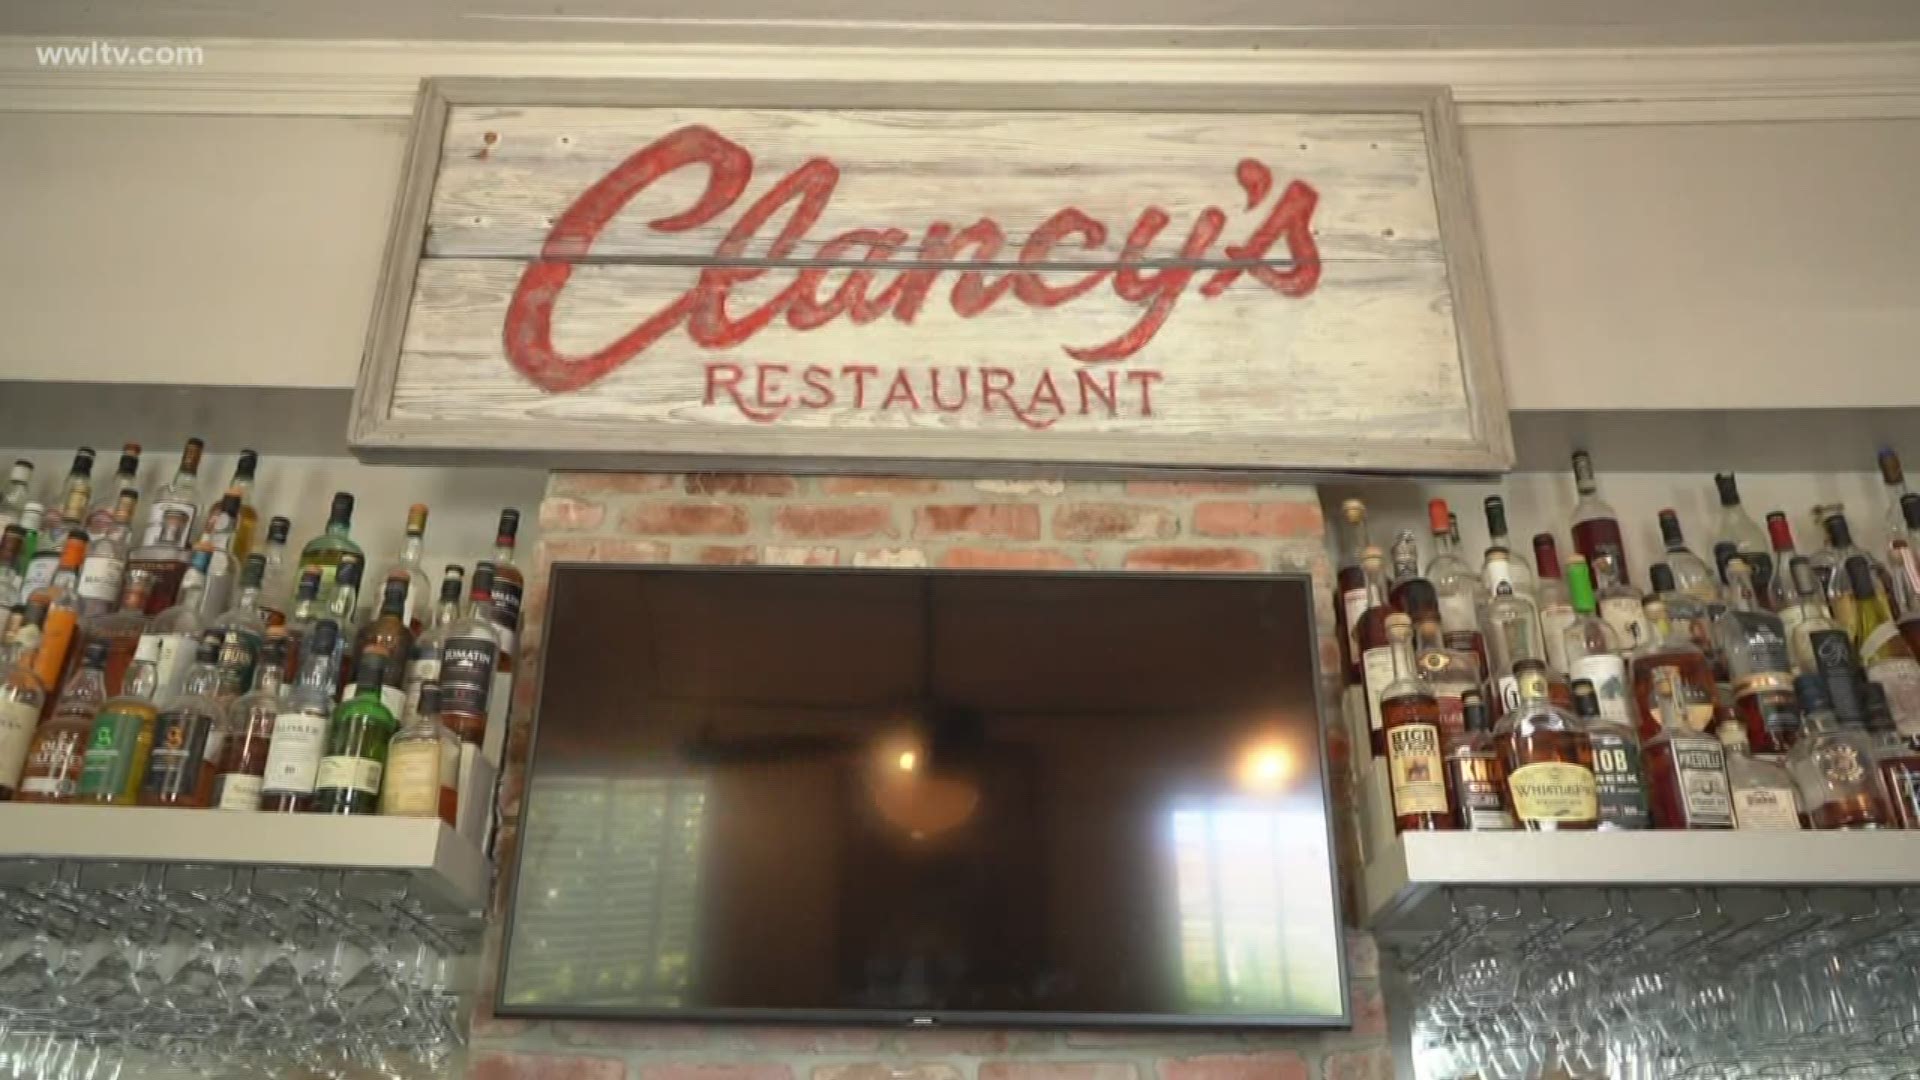 It is a staple of Uptown New Orleans. In Today's Main Course, Eric Paulsen takes a look at the storied history of Clancy's.